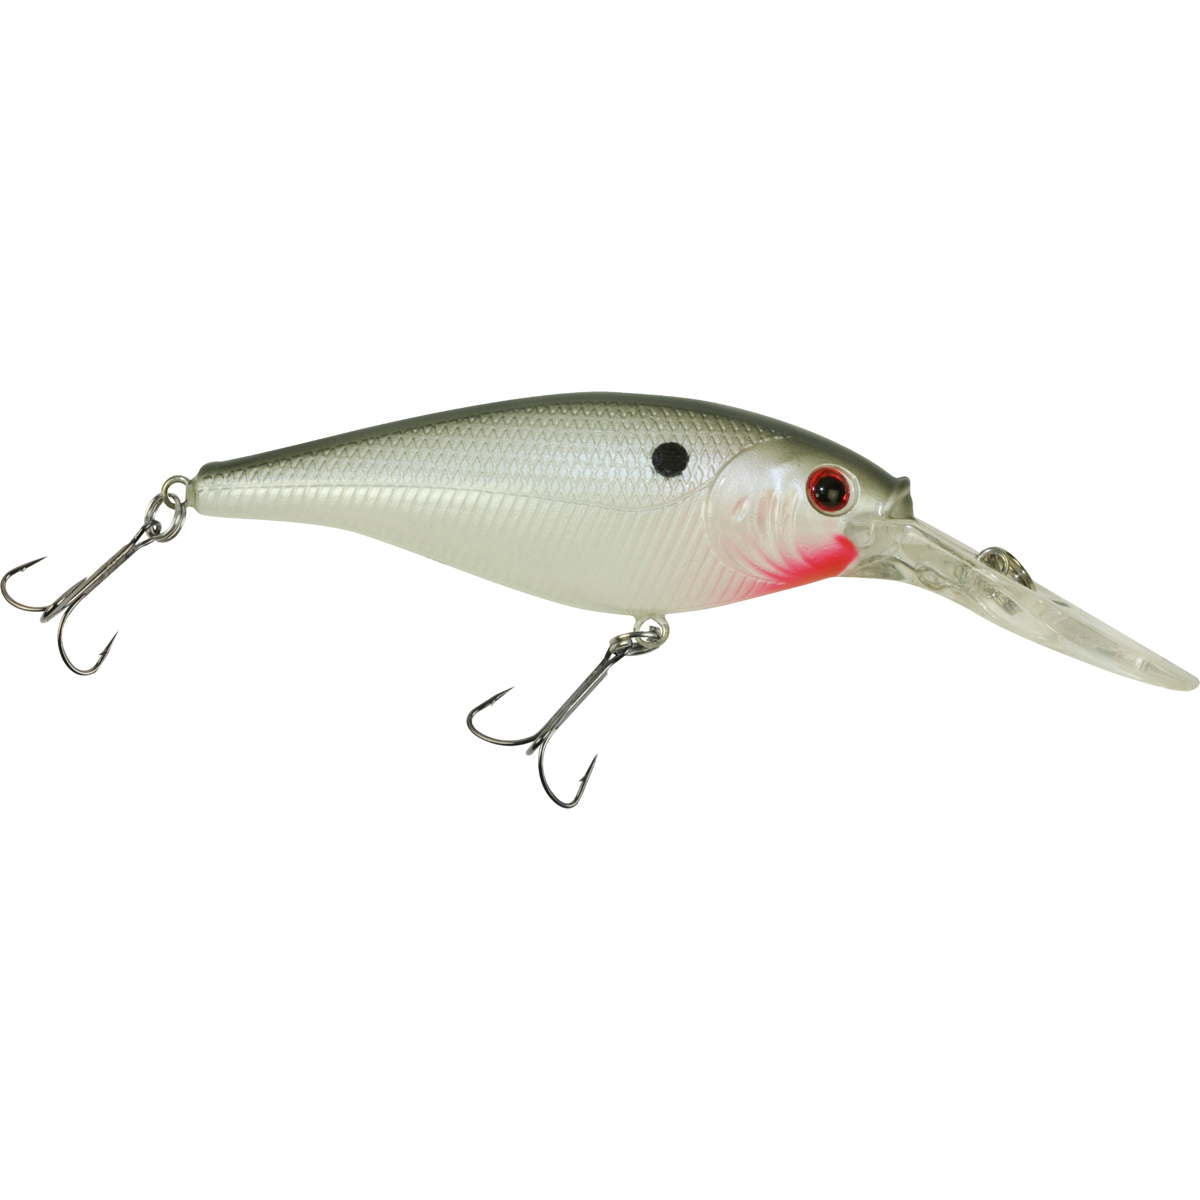 Photo of Berkley Flicker Shad - Large for sale at United Tackle Shops.